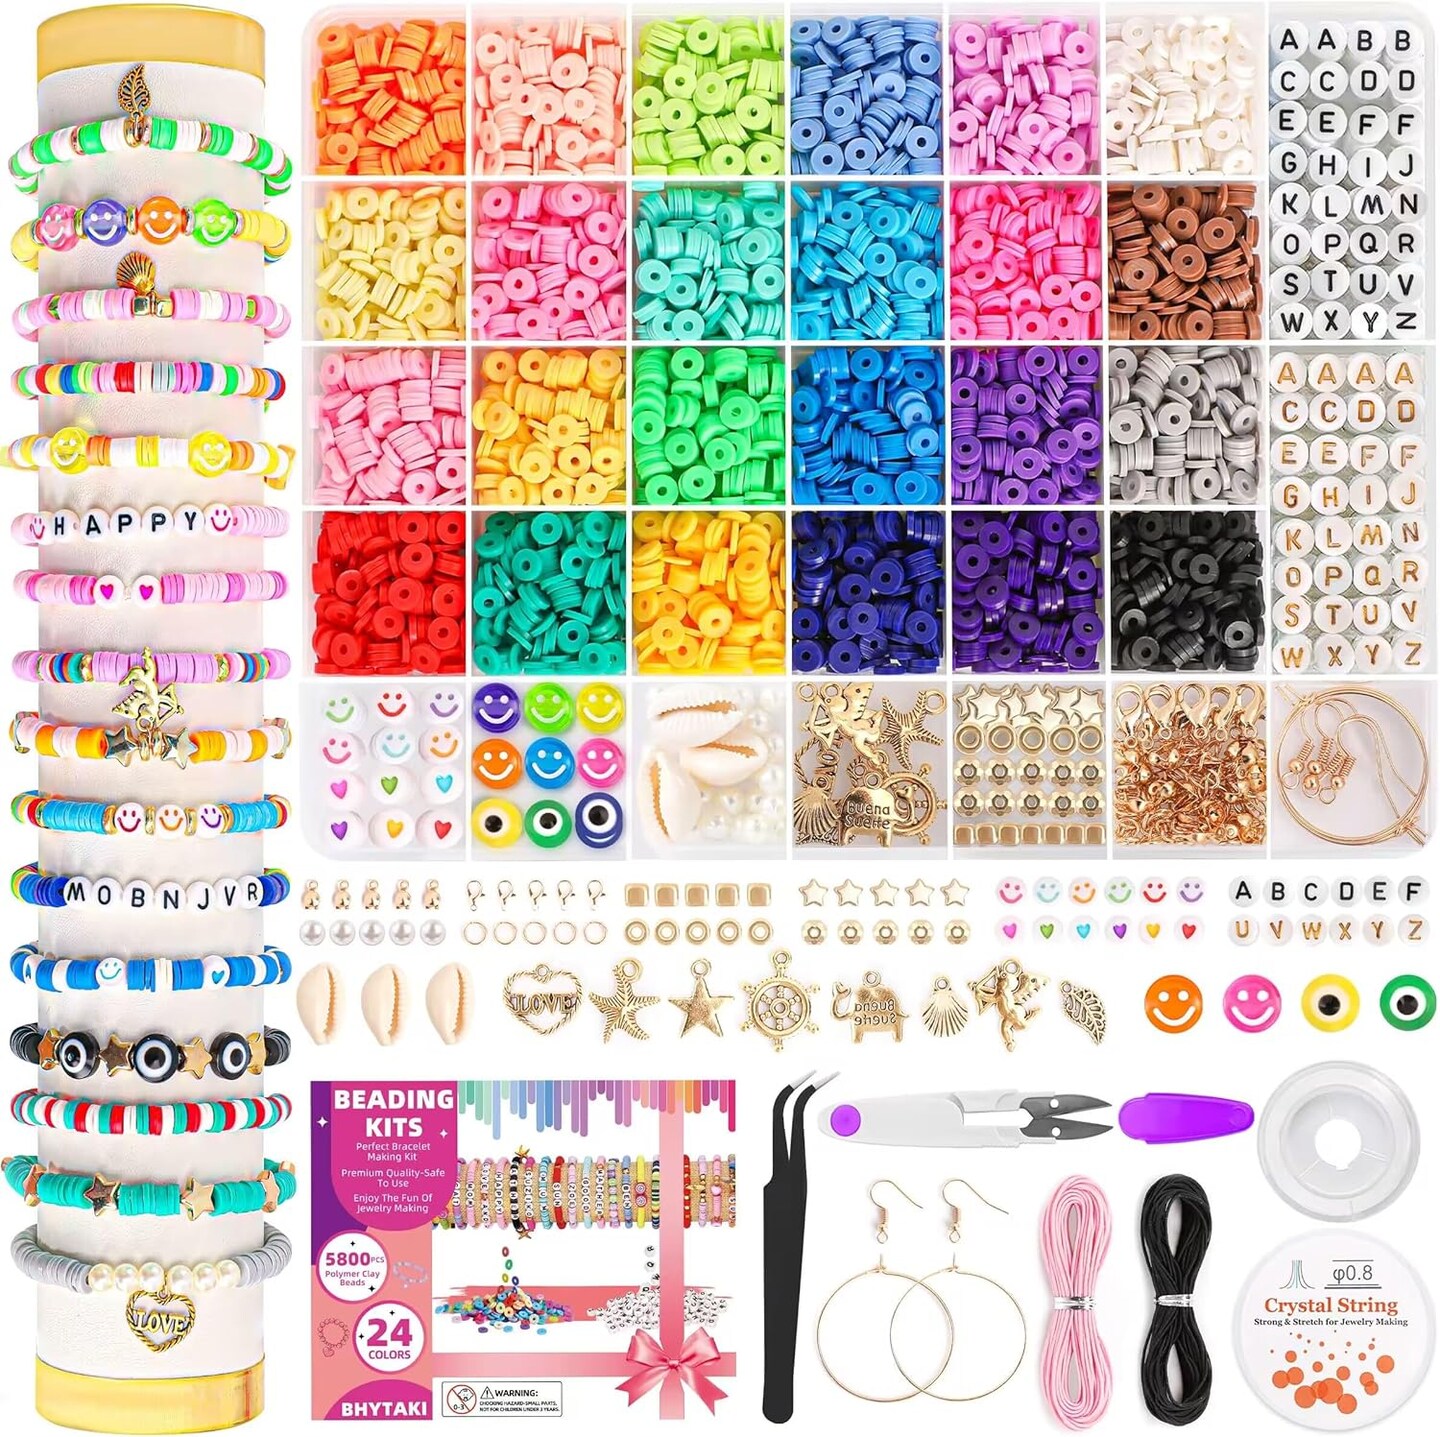 5800 PCS Clay Beads Bracelet Making Kit, 24 Colors Flat Preppy Beads for Friendship Jewelry Making, Polymer Heishi Beads with Charms DIY Arts and Crafts Birthday Gifts Toys for Teen Girls Age 6+